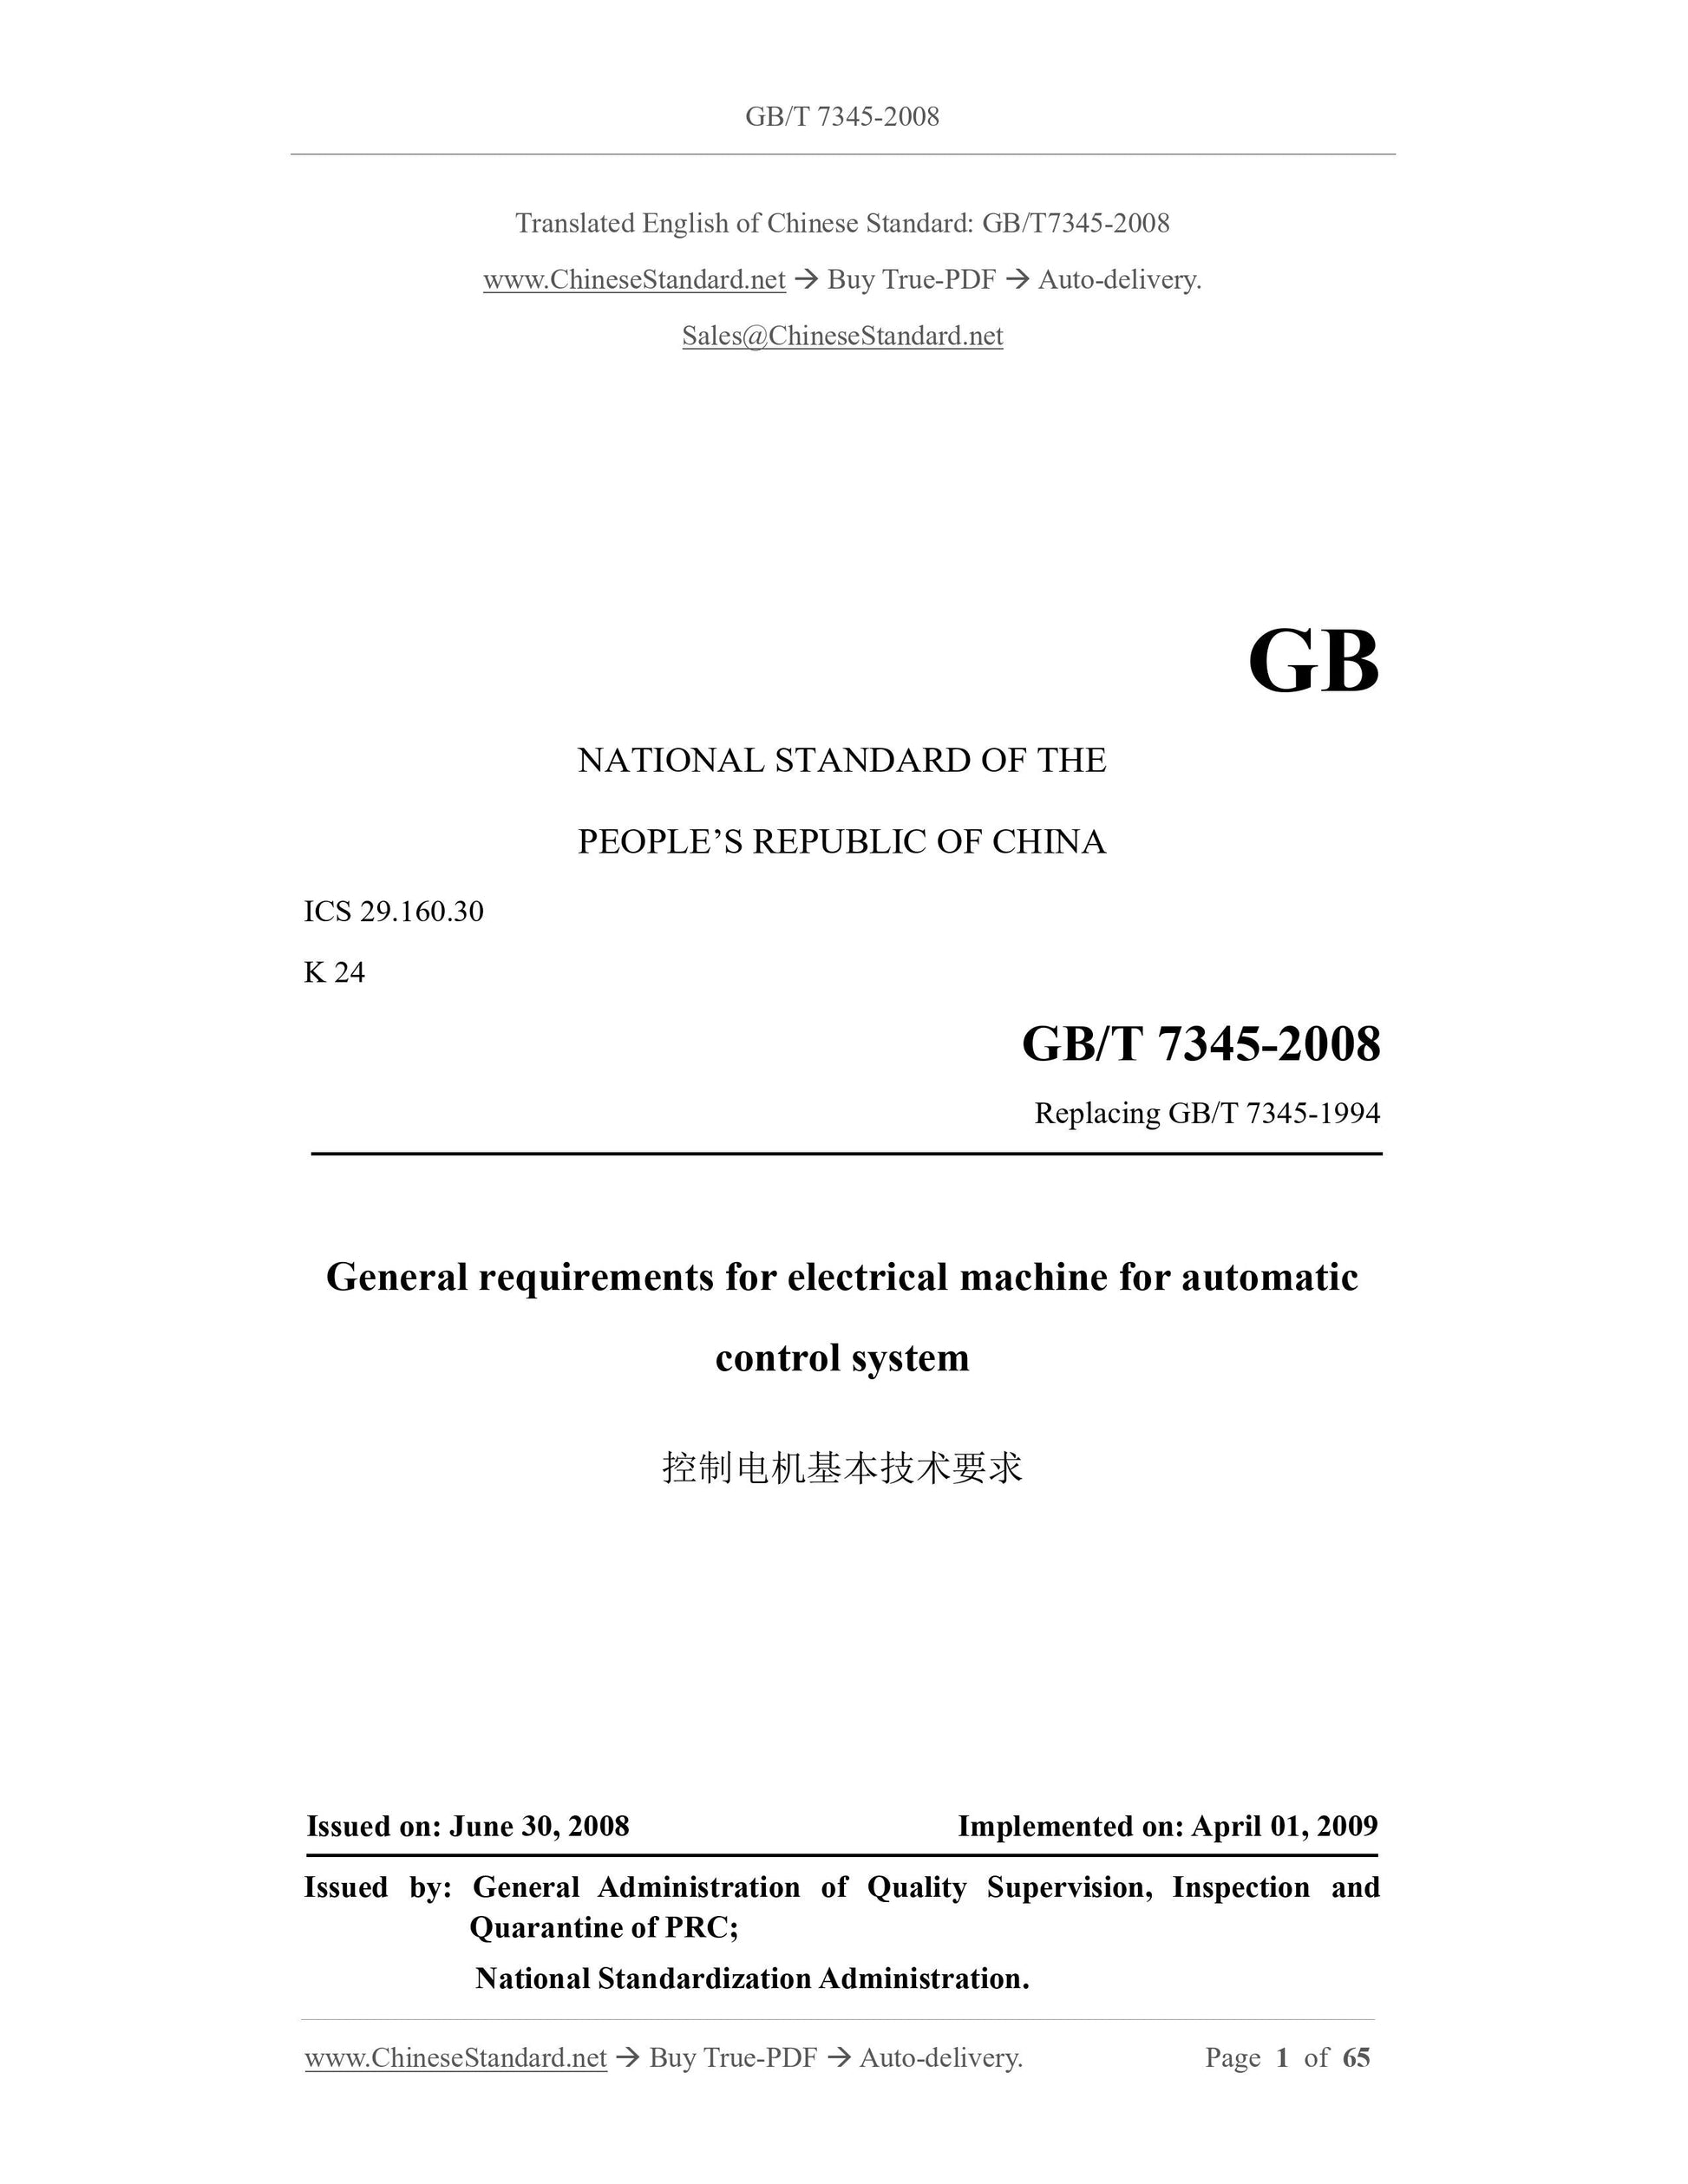 GB/T 7345-2008 Page 1